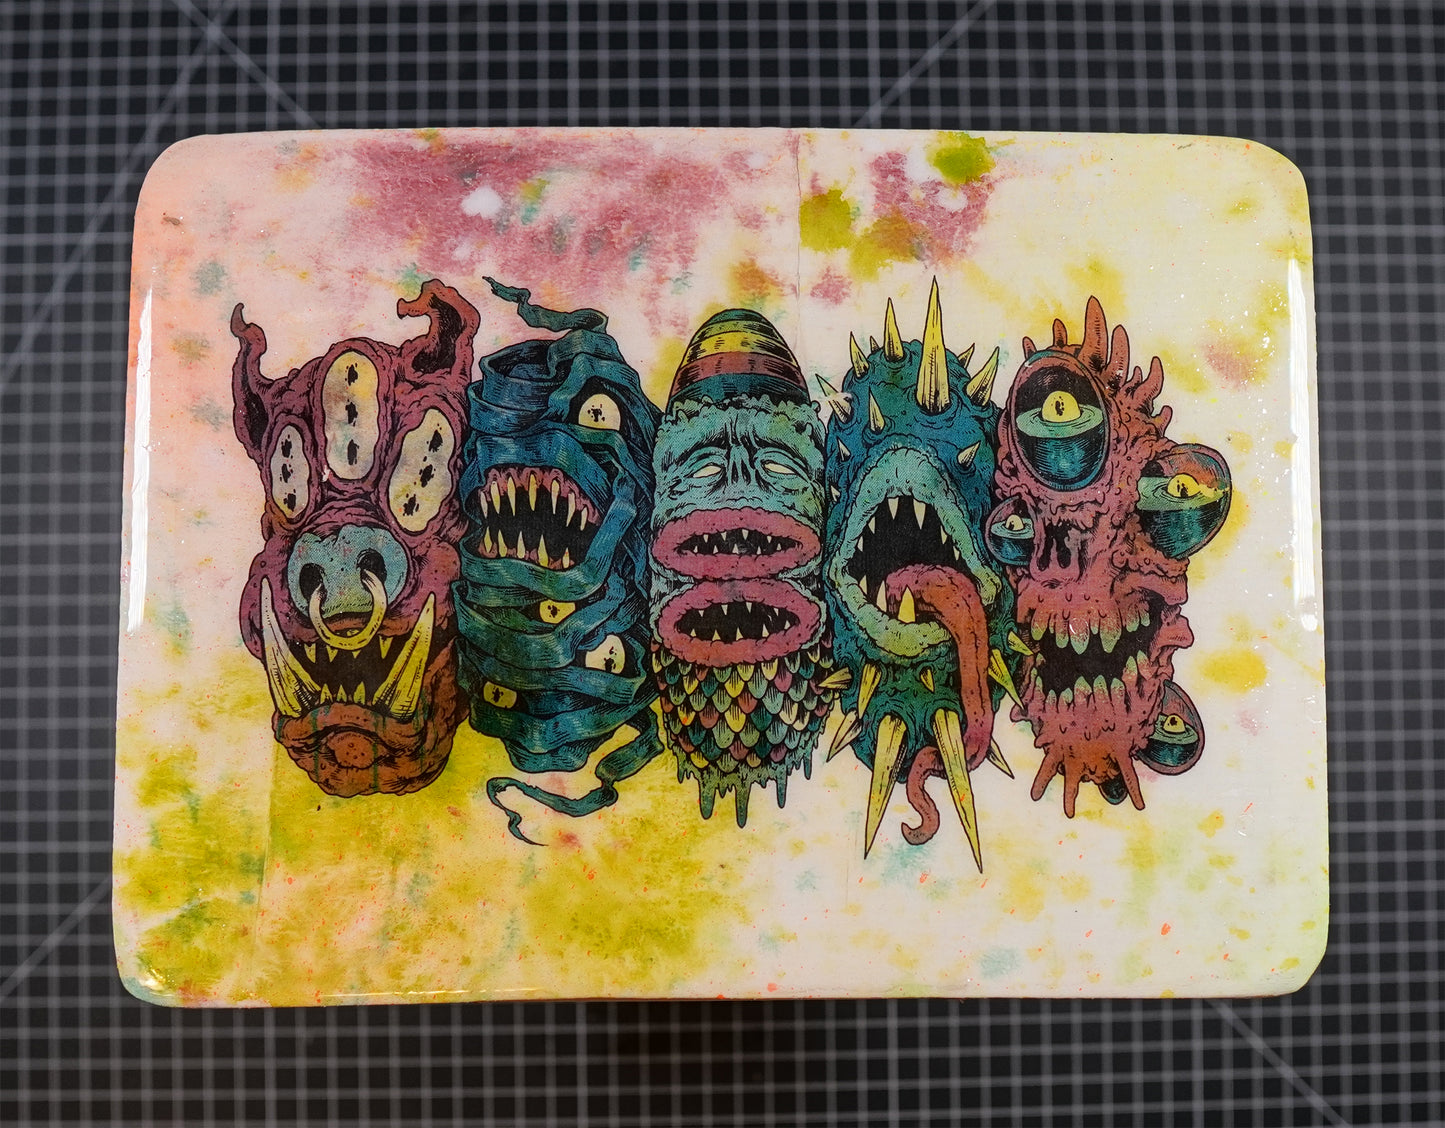 5 More Monster Heads in a Row - Wood Transfer